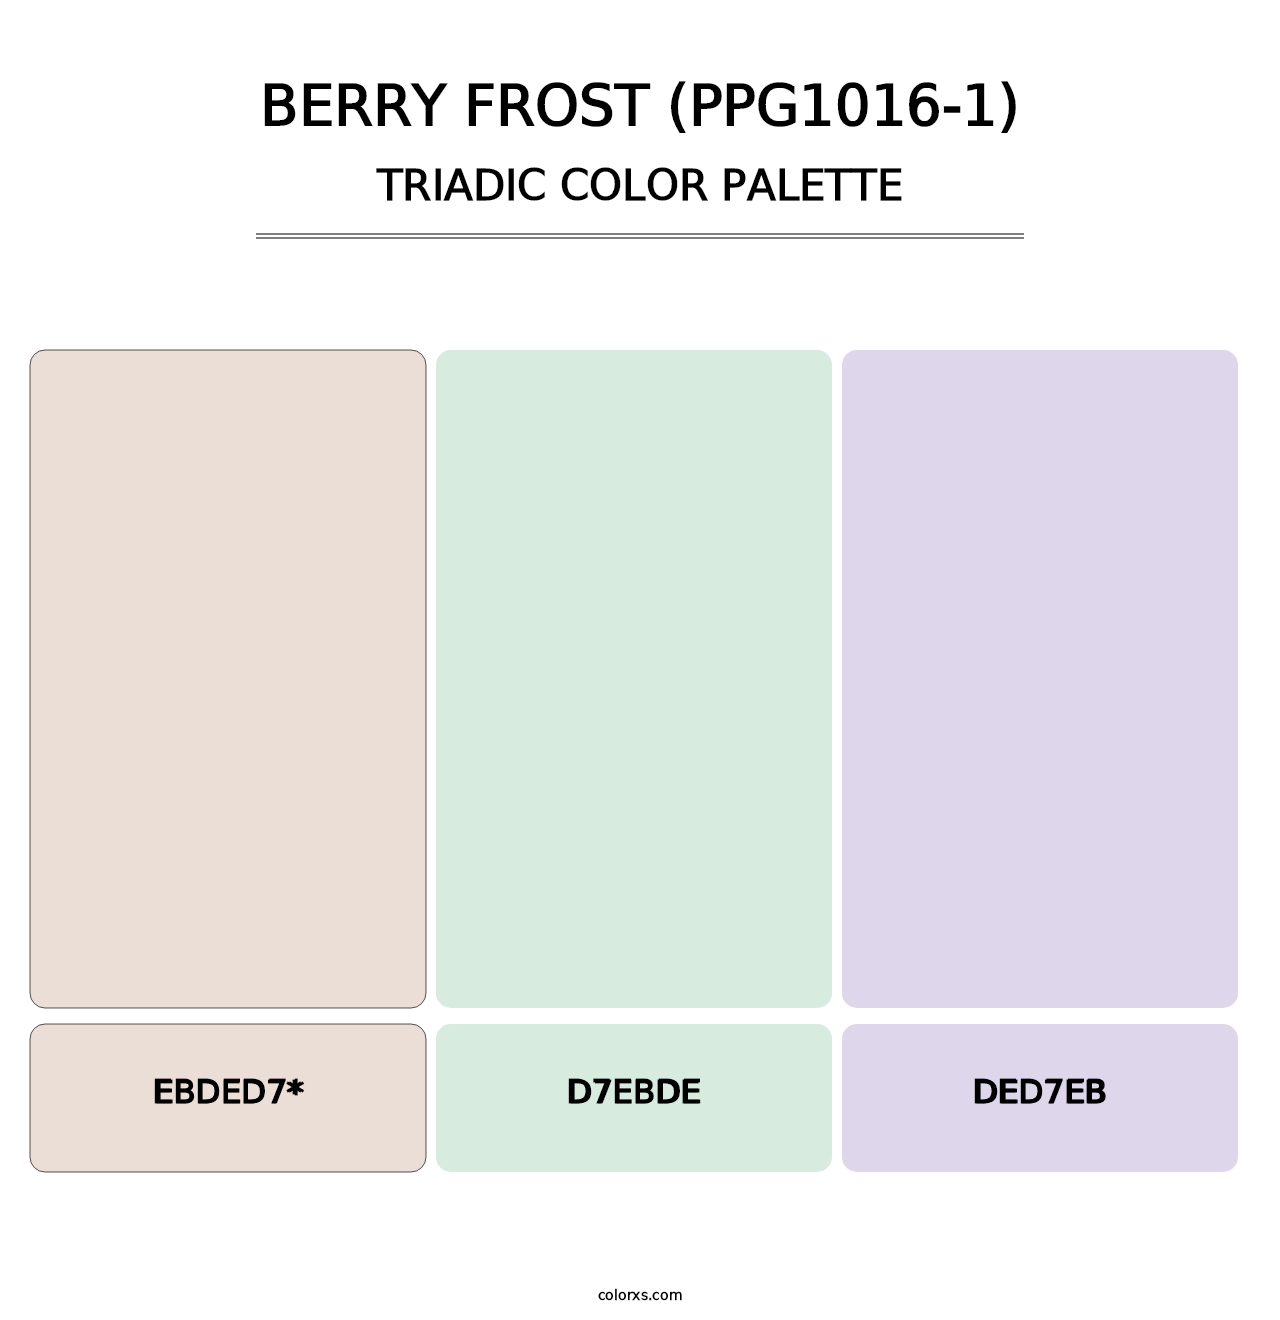 Berry Frost (PPG1016-1) - Triadic Color Palette